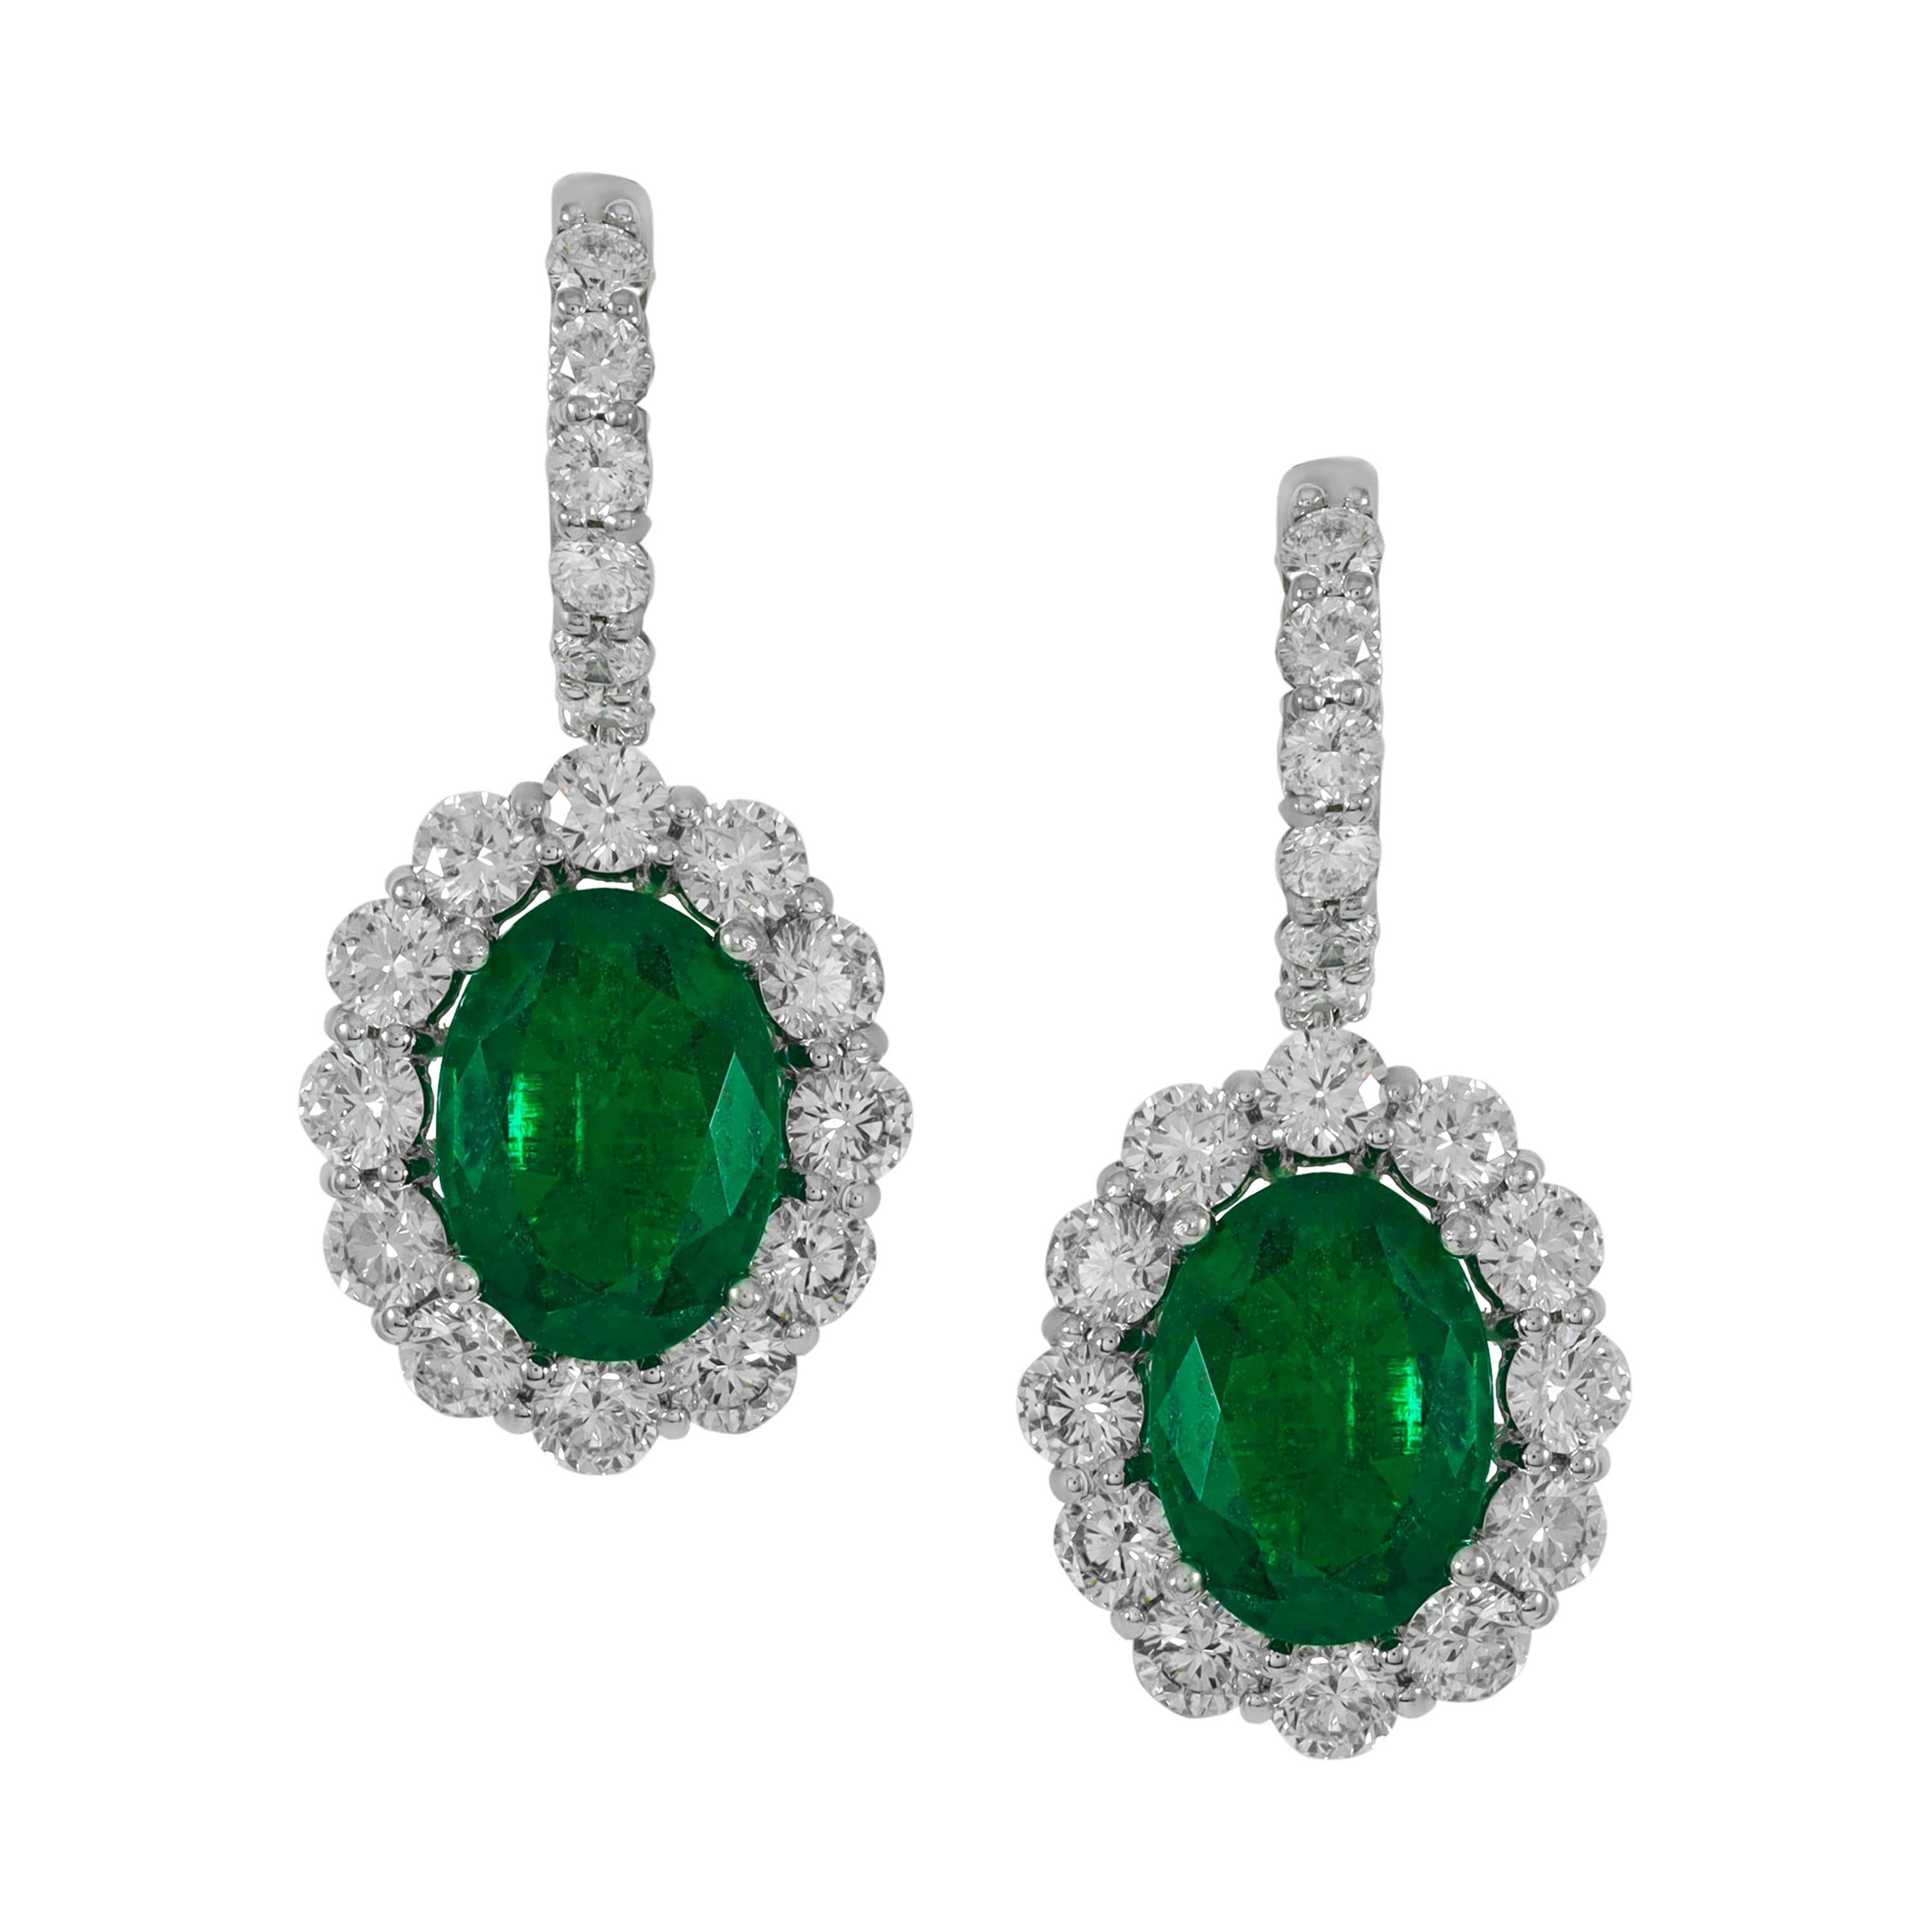 Fancy Earrings with Round Diamonds and Emerald For Sale at 1stDibs